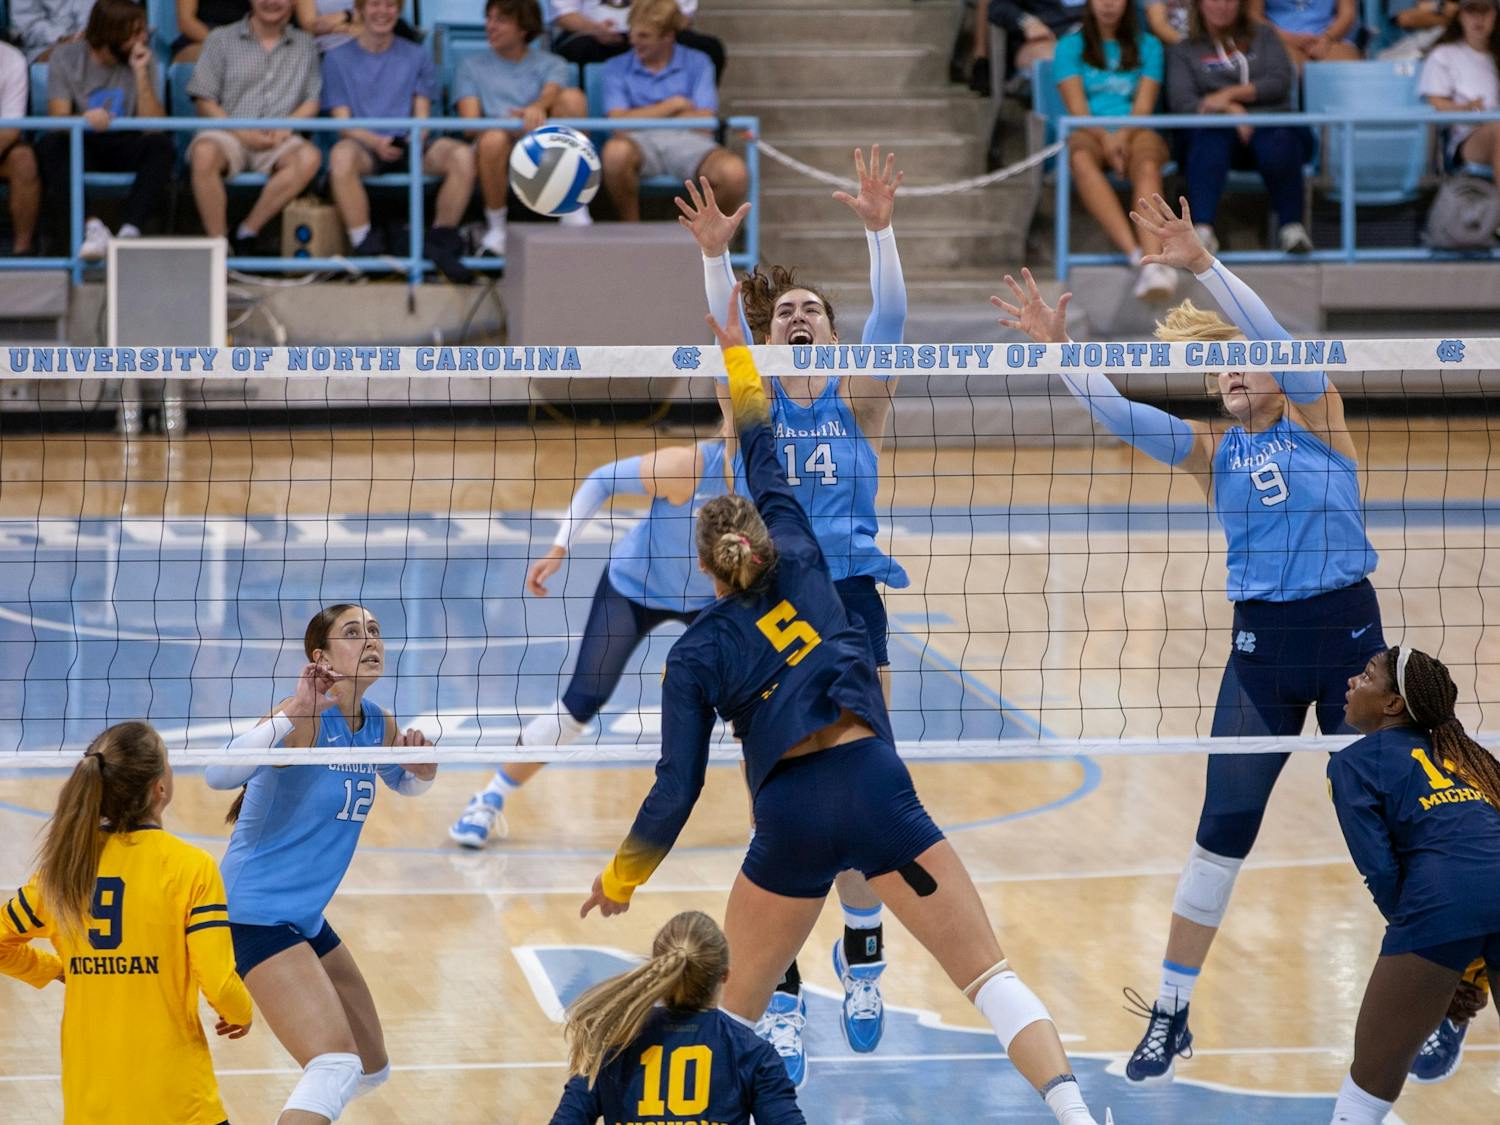 UNC junior middle hitter Kaya Merkler (14) and UNC sophomore Mabrey Shaffmaster (9) block the ball during volleyball match against Michigan on Saturday, Sept. 10, 2022, at Carmichael Arena. Michigan beat UNC 3-0.